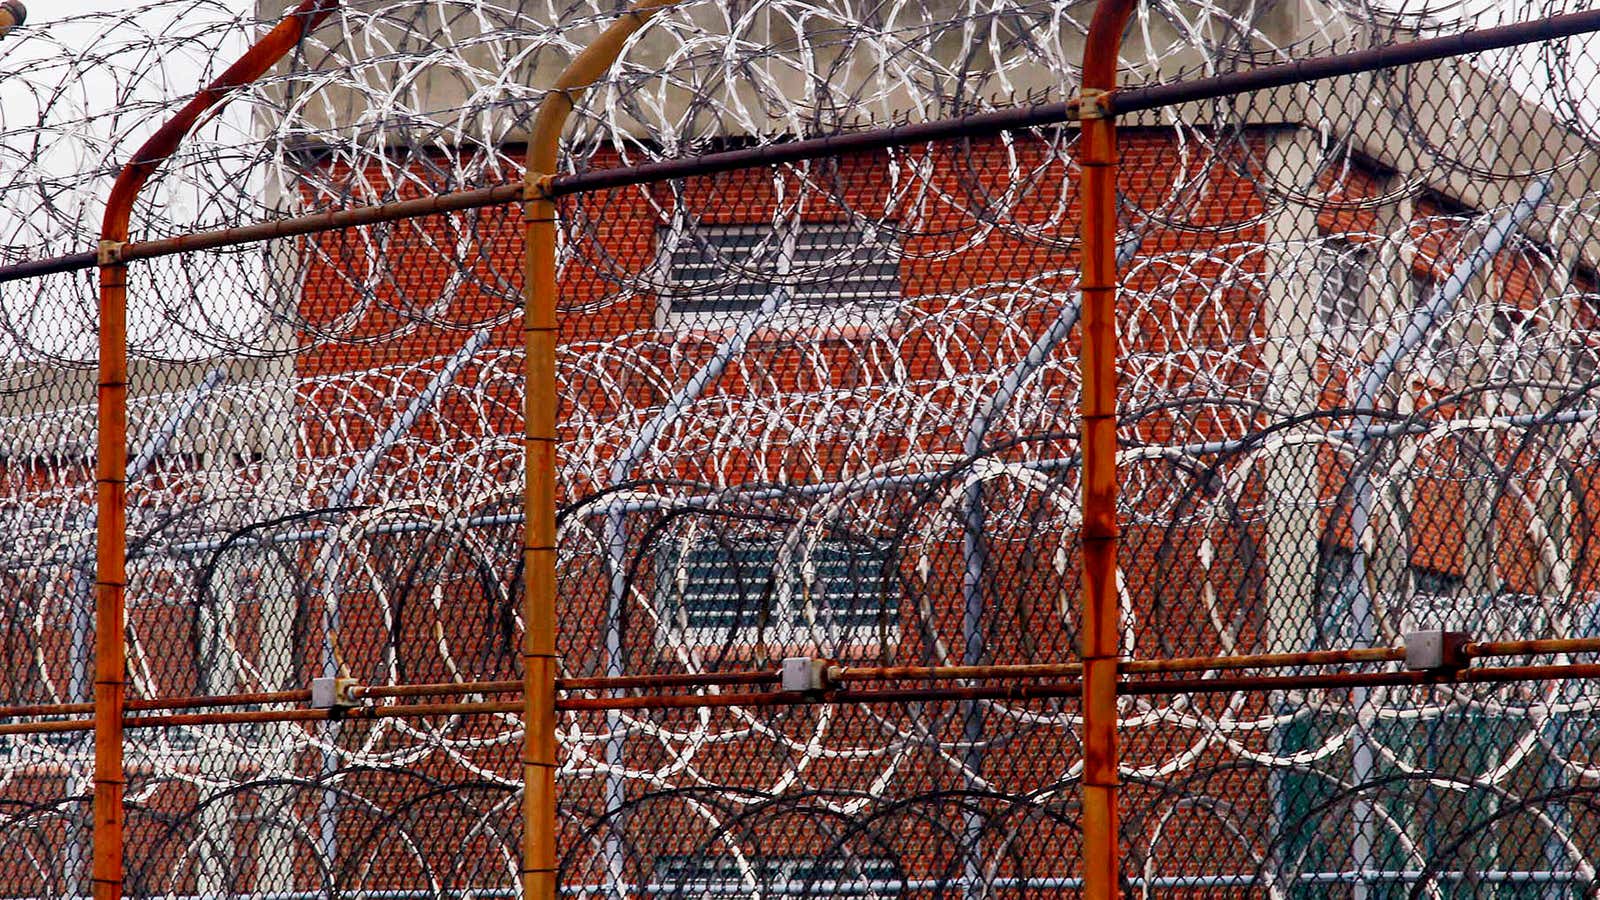 A fence covered in barbed wire surrounds inmate housing at the Rikers Island.